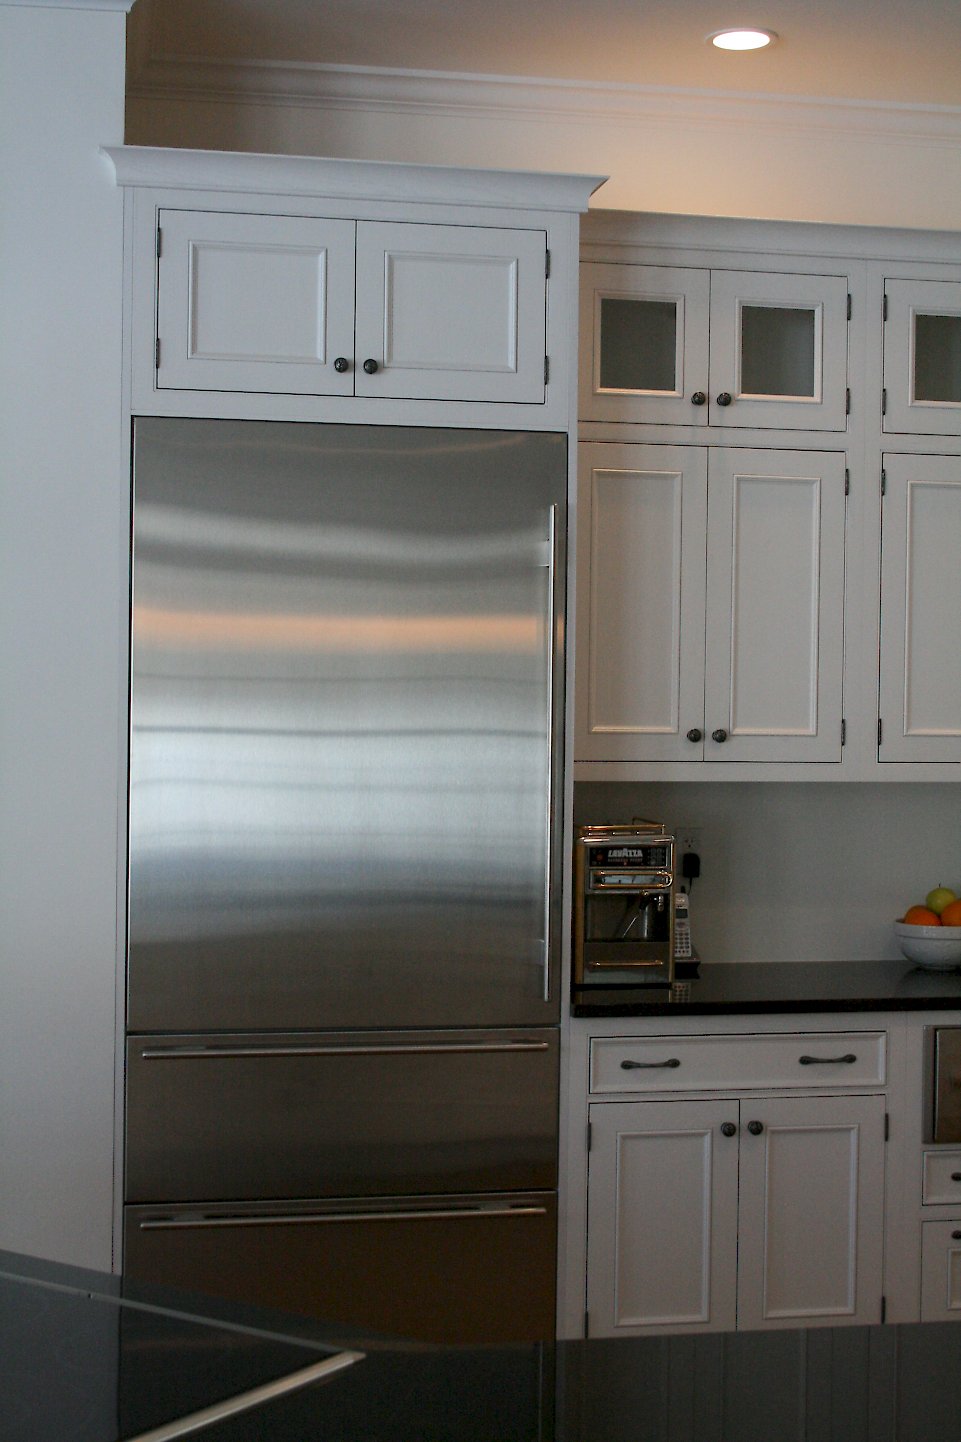 Sub-Zero #736TCI refrigerator with a stainless front.